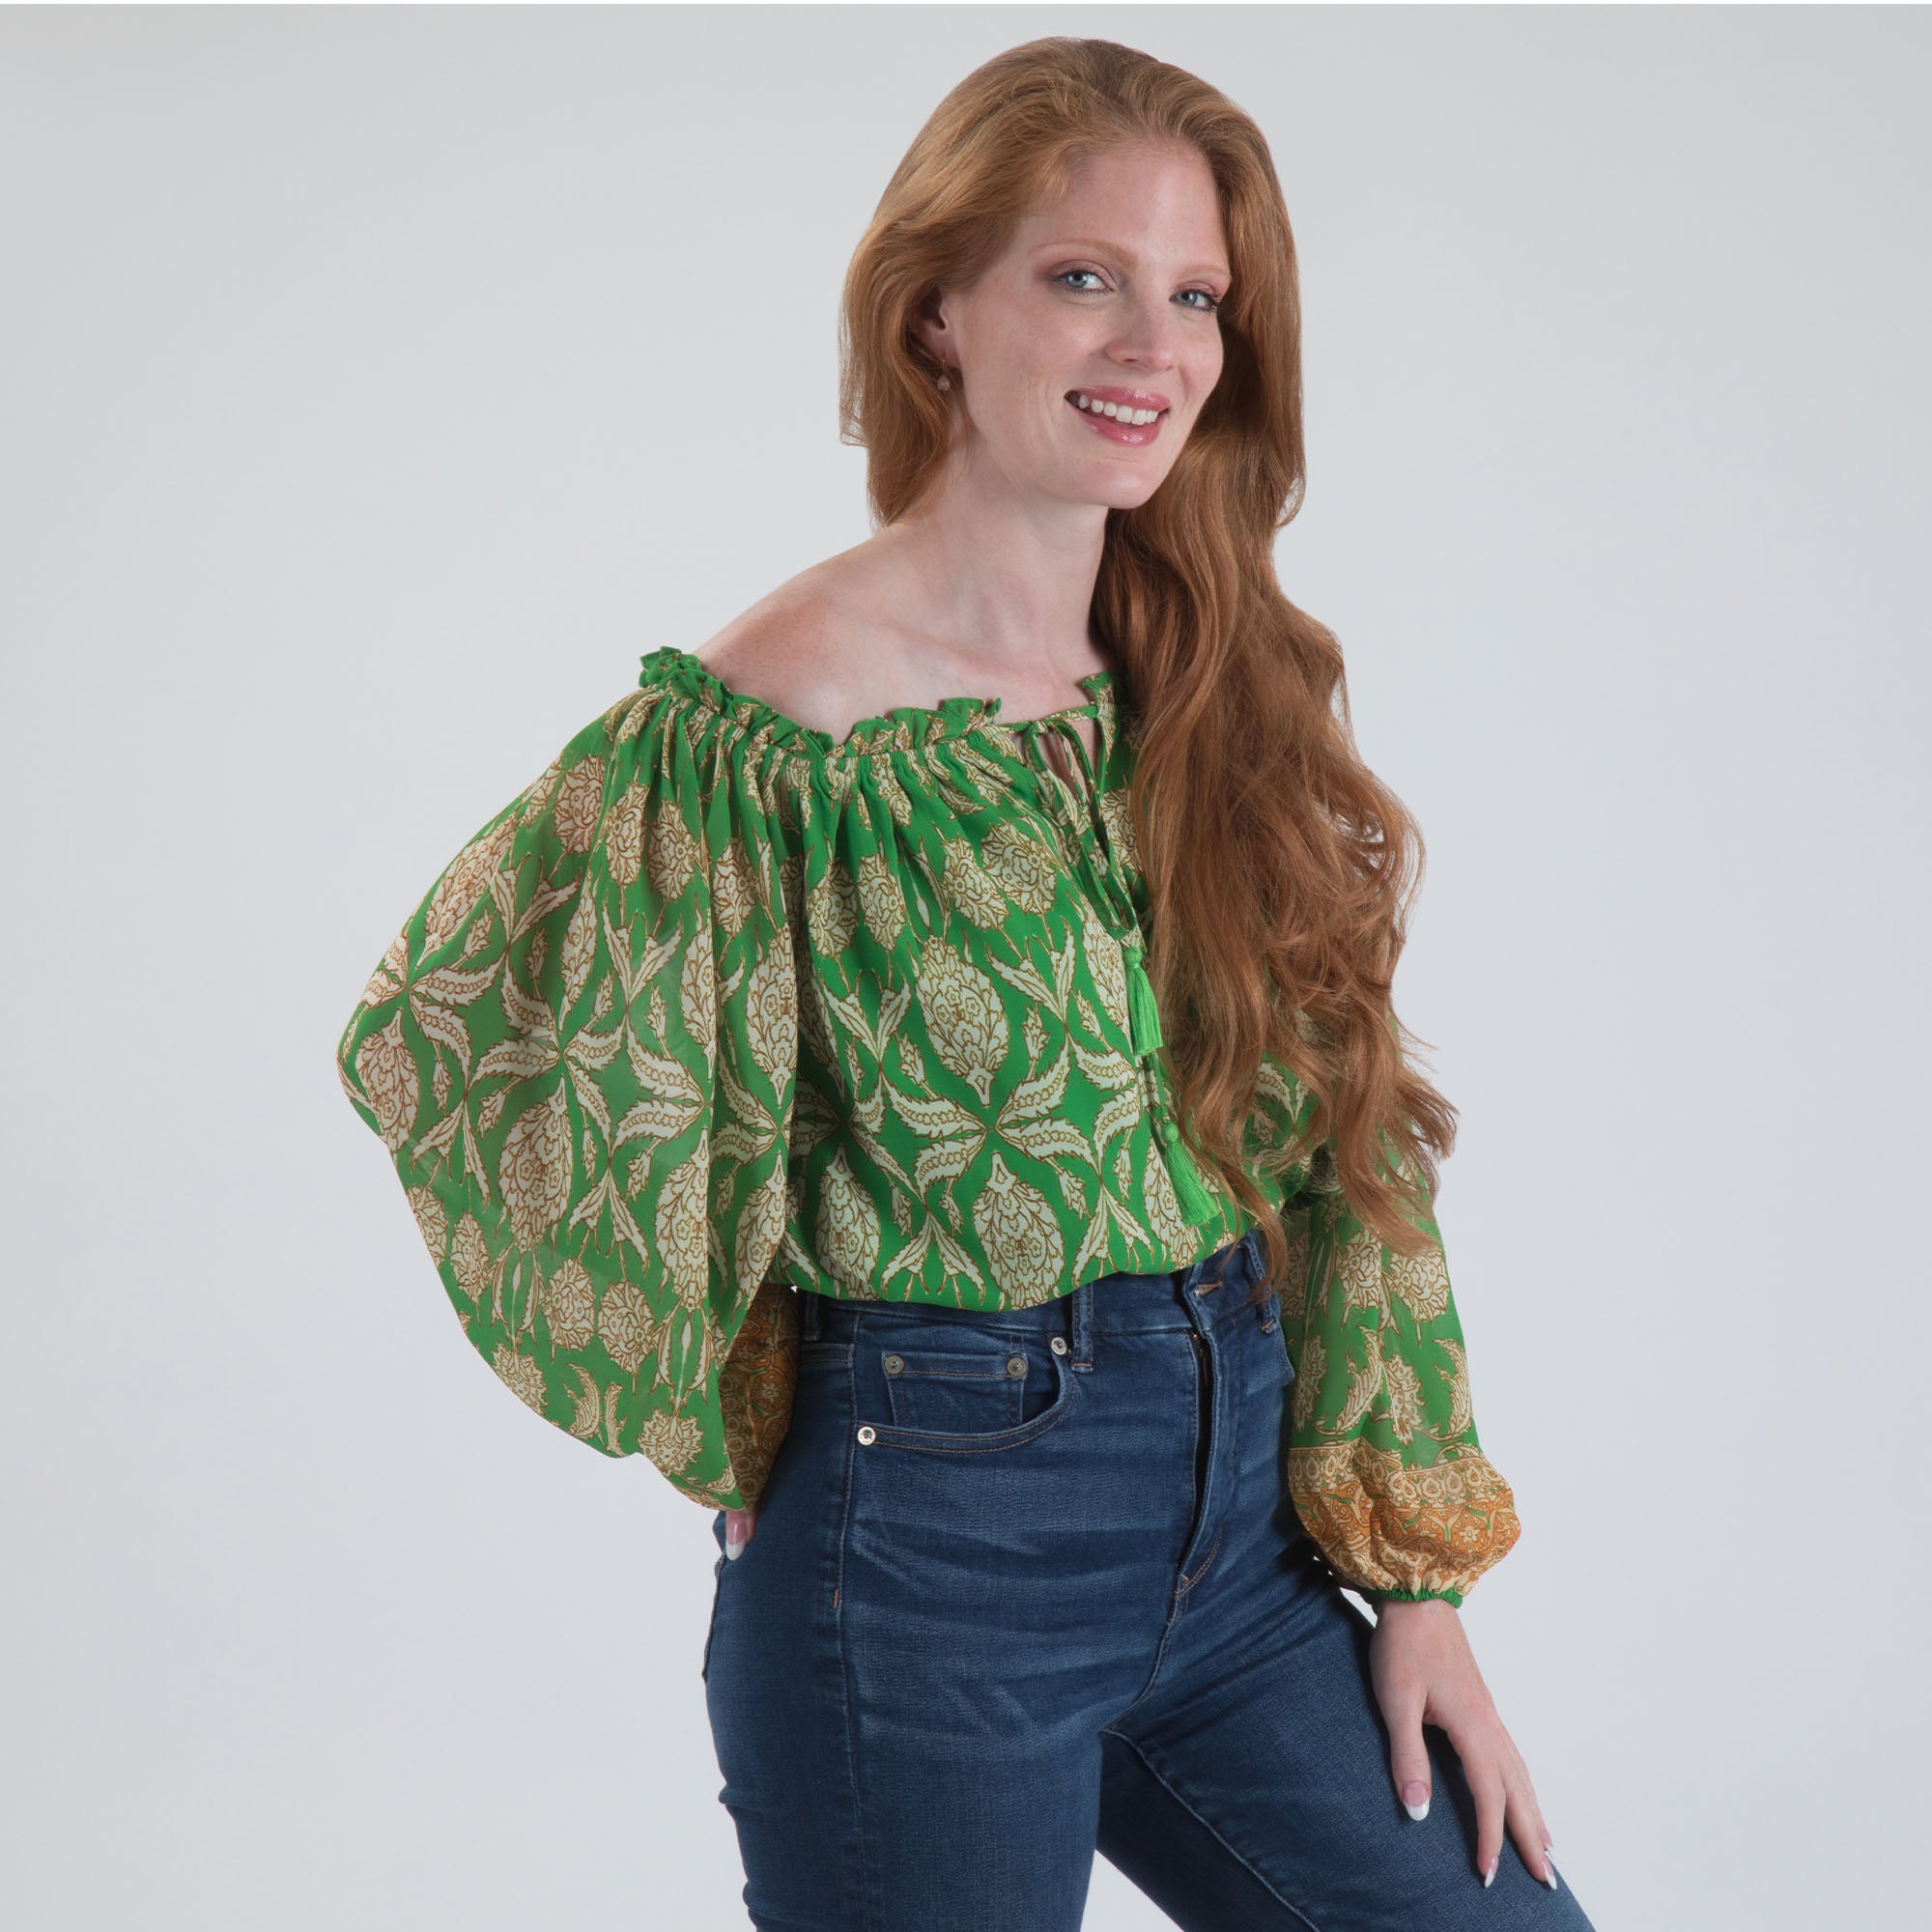 Off-the-Shoulder Concentric Design Top - Green - S